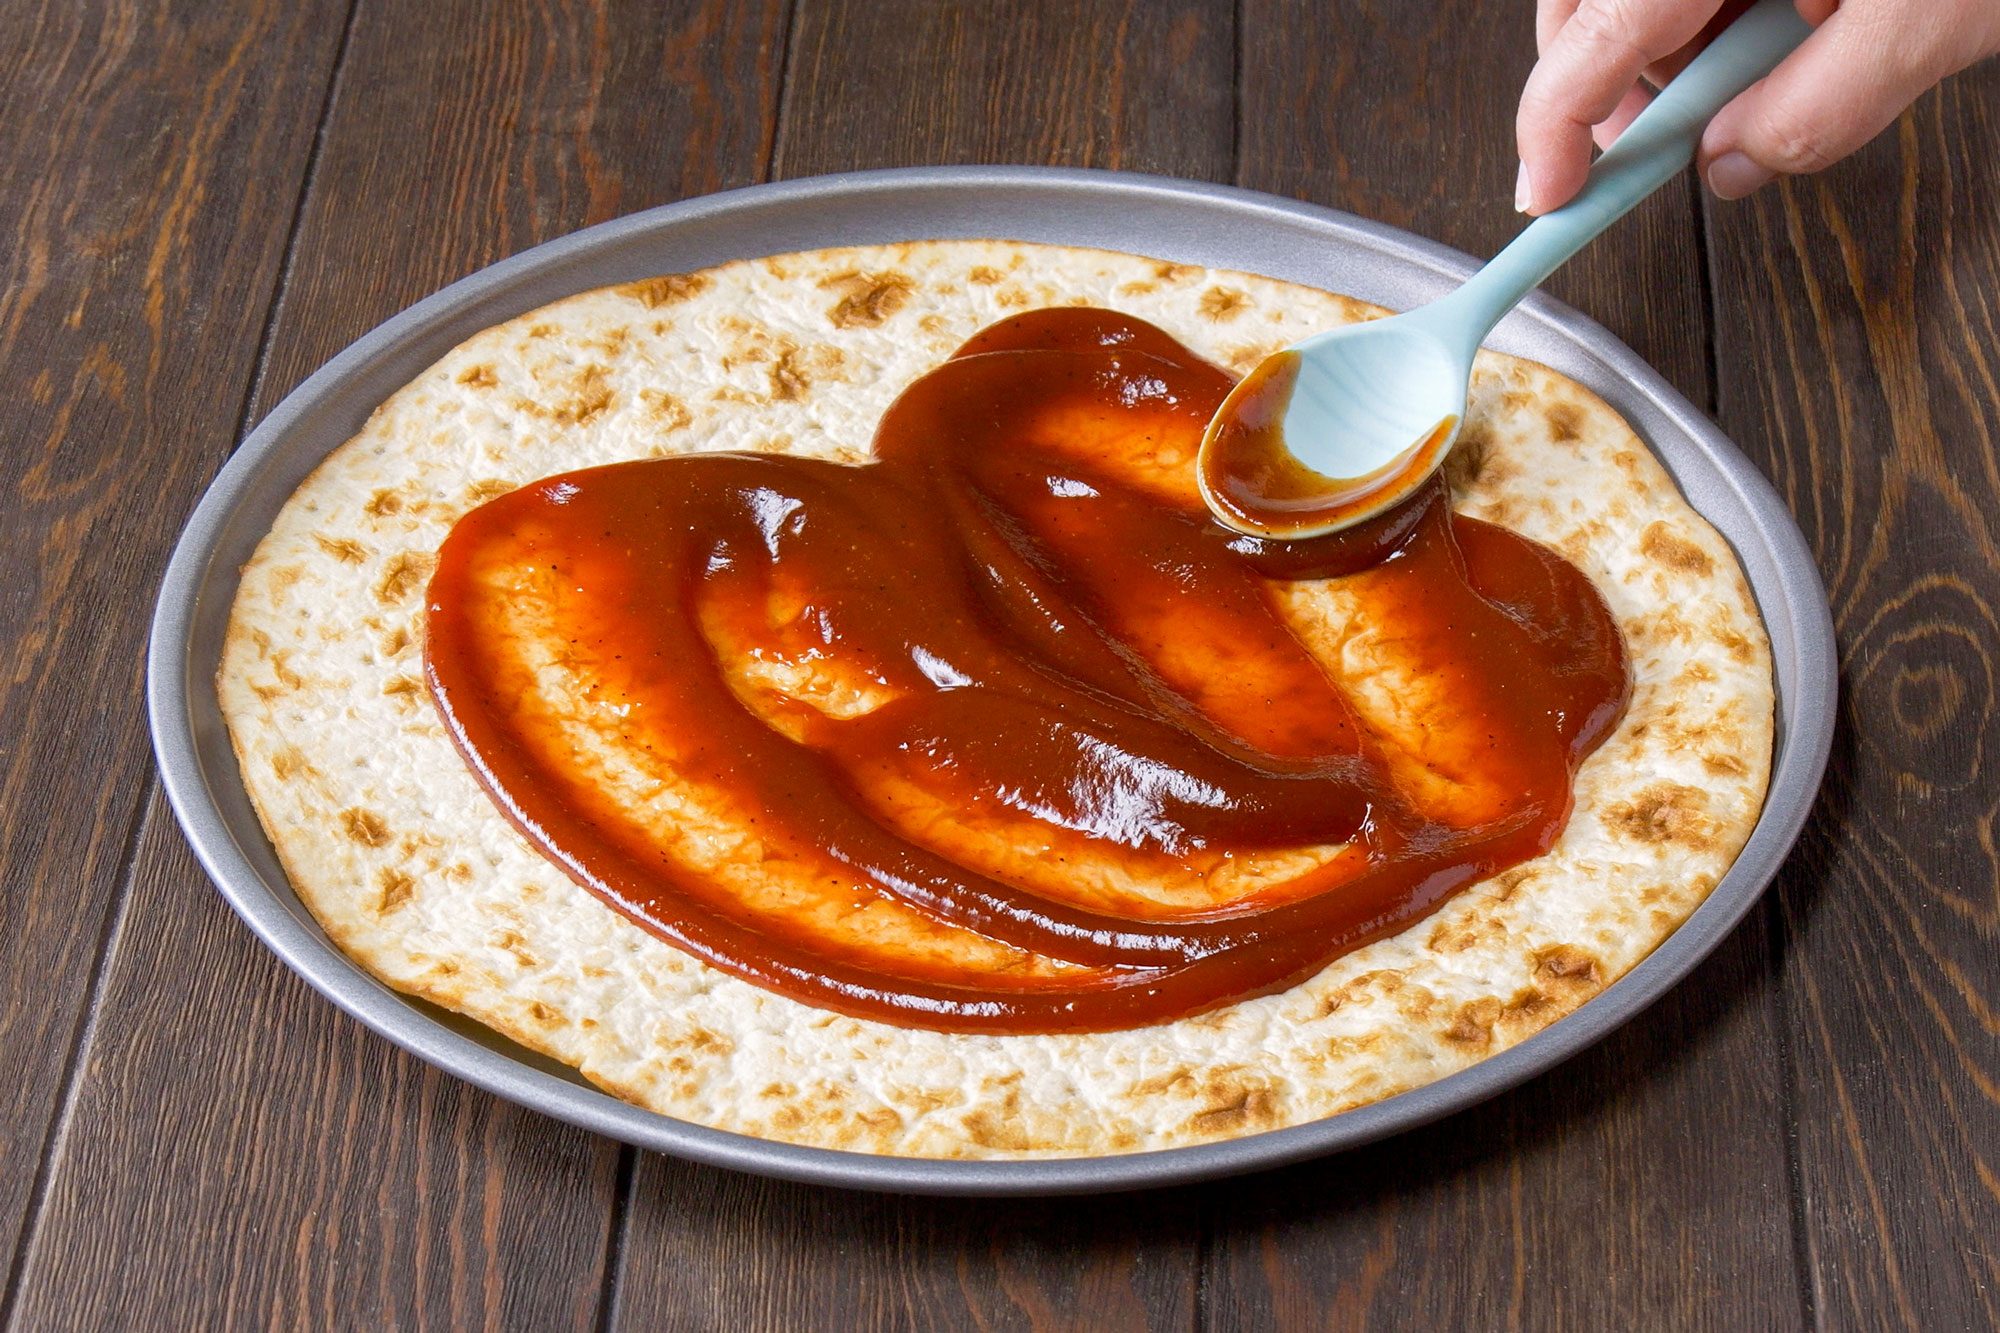 Applying Barbecue Sauce on Pizza Crust with a Plastic Spoon, Wooden Background